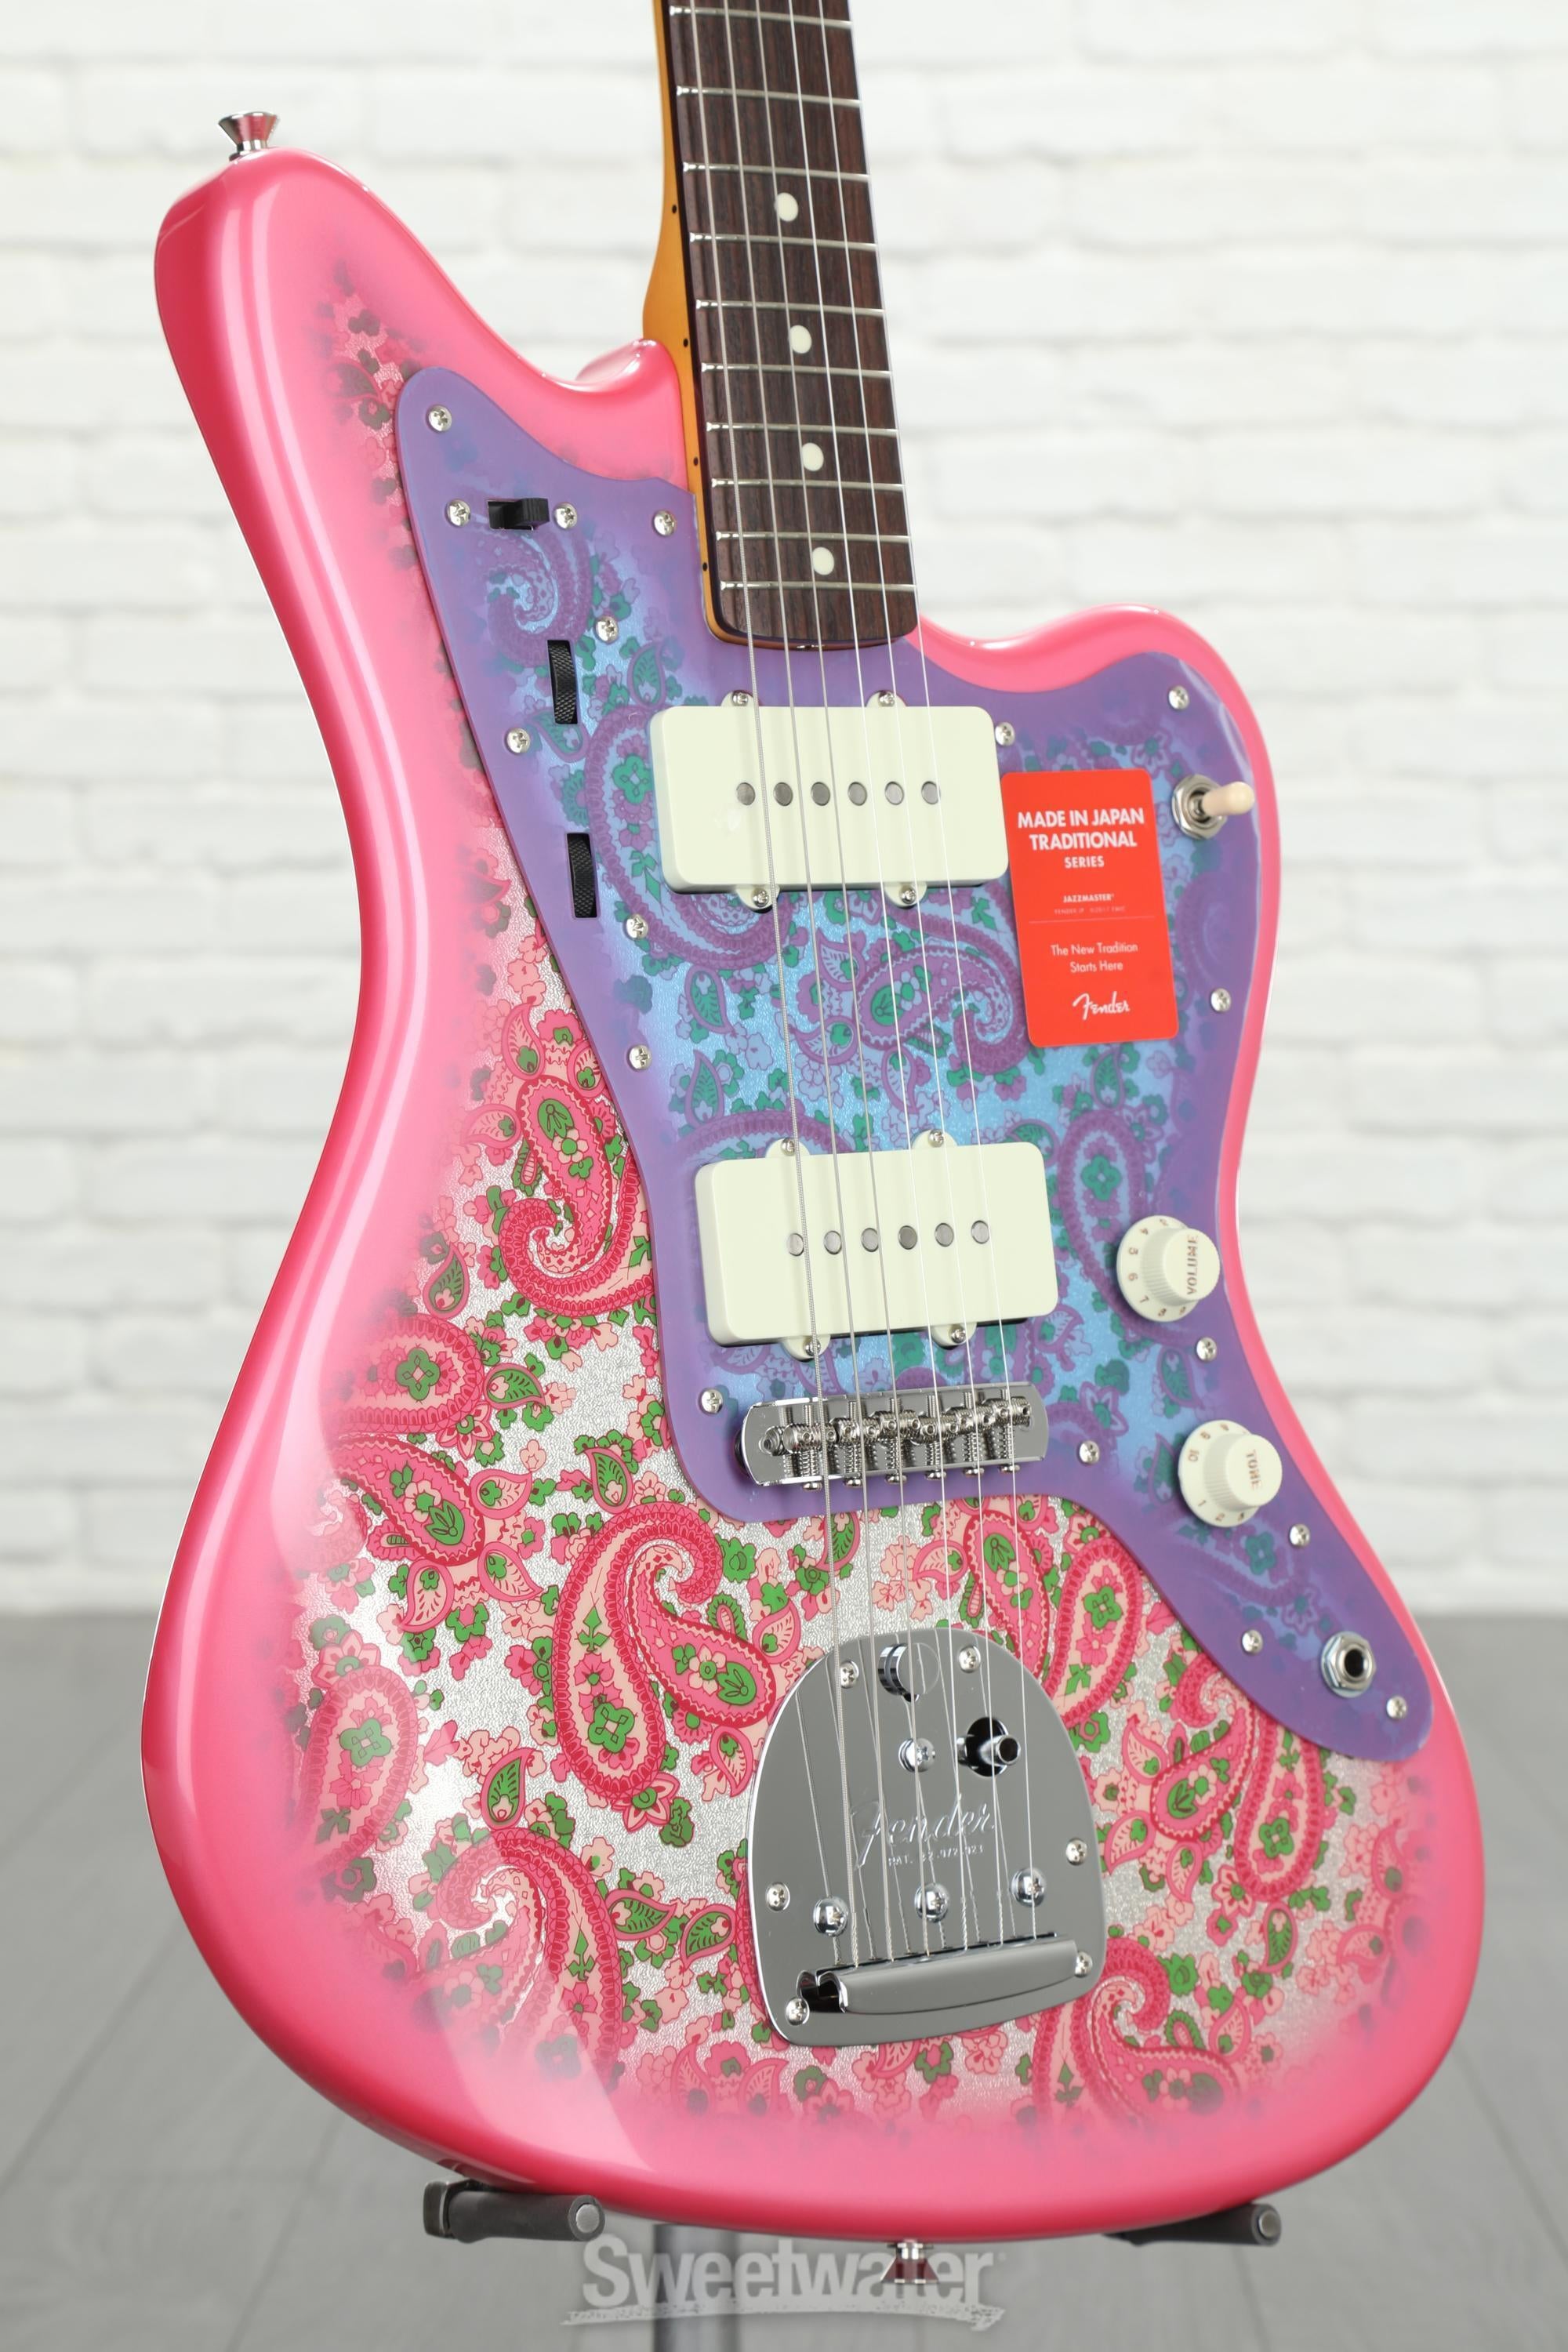 Fender Made in Japan Traditional '60s Jazzmaster - Pink Paisley